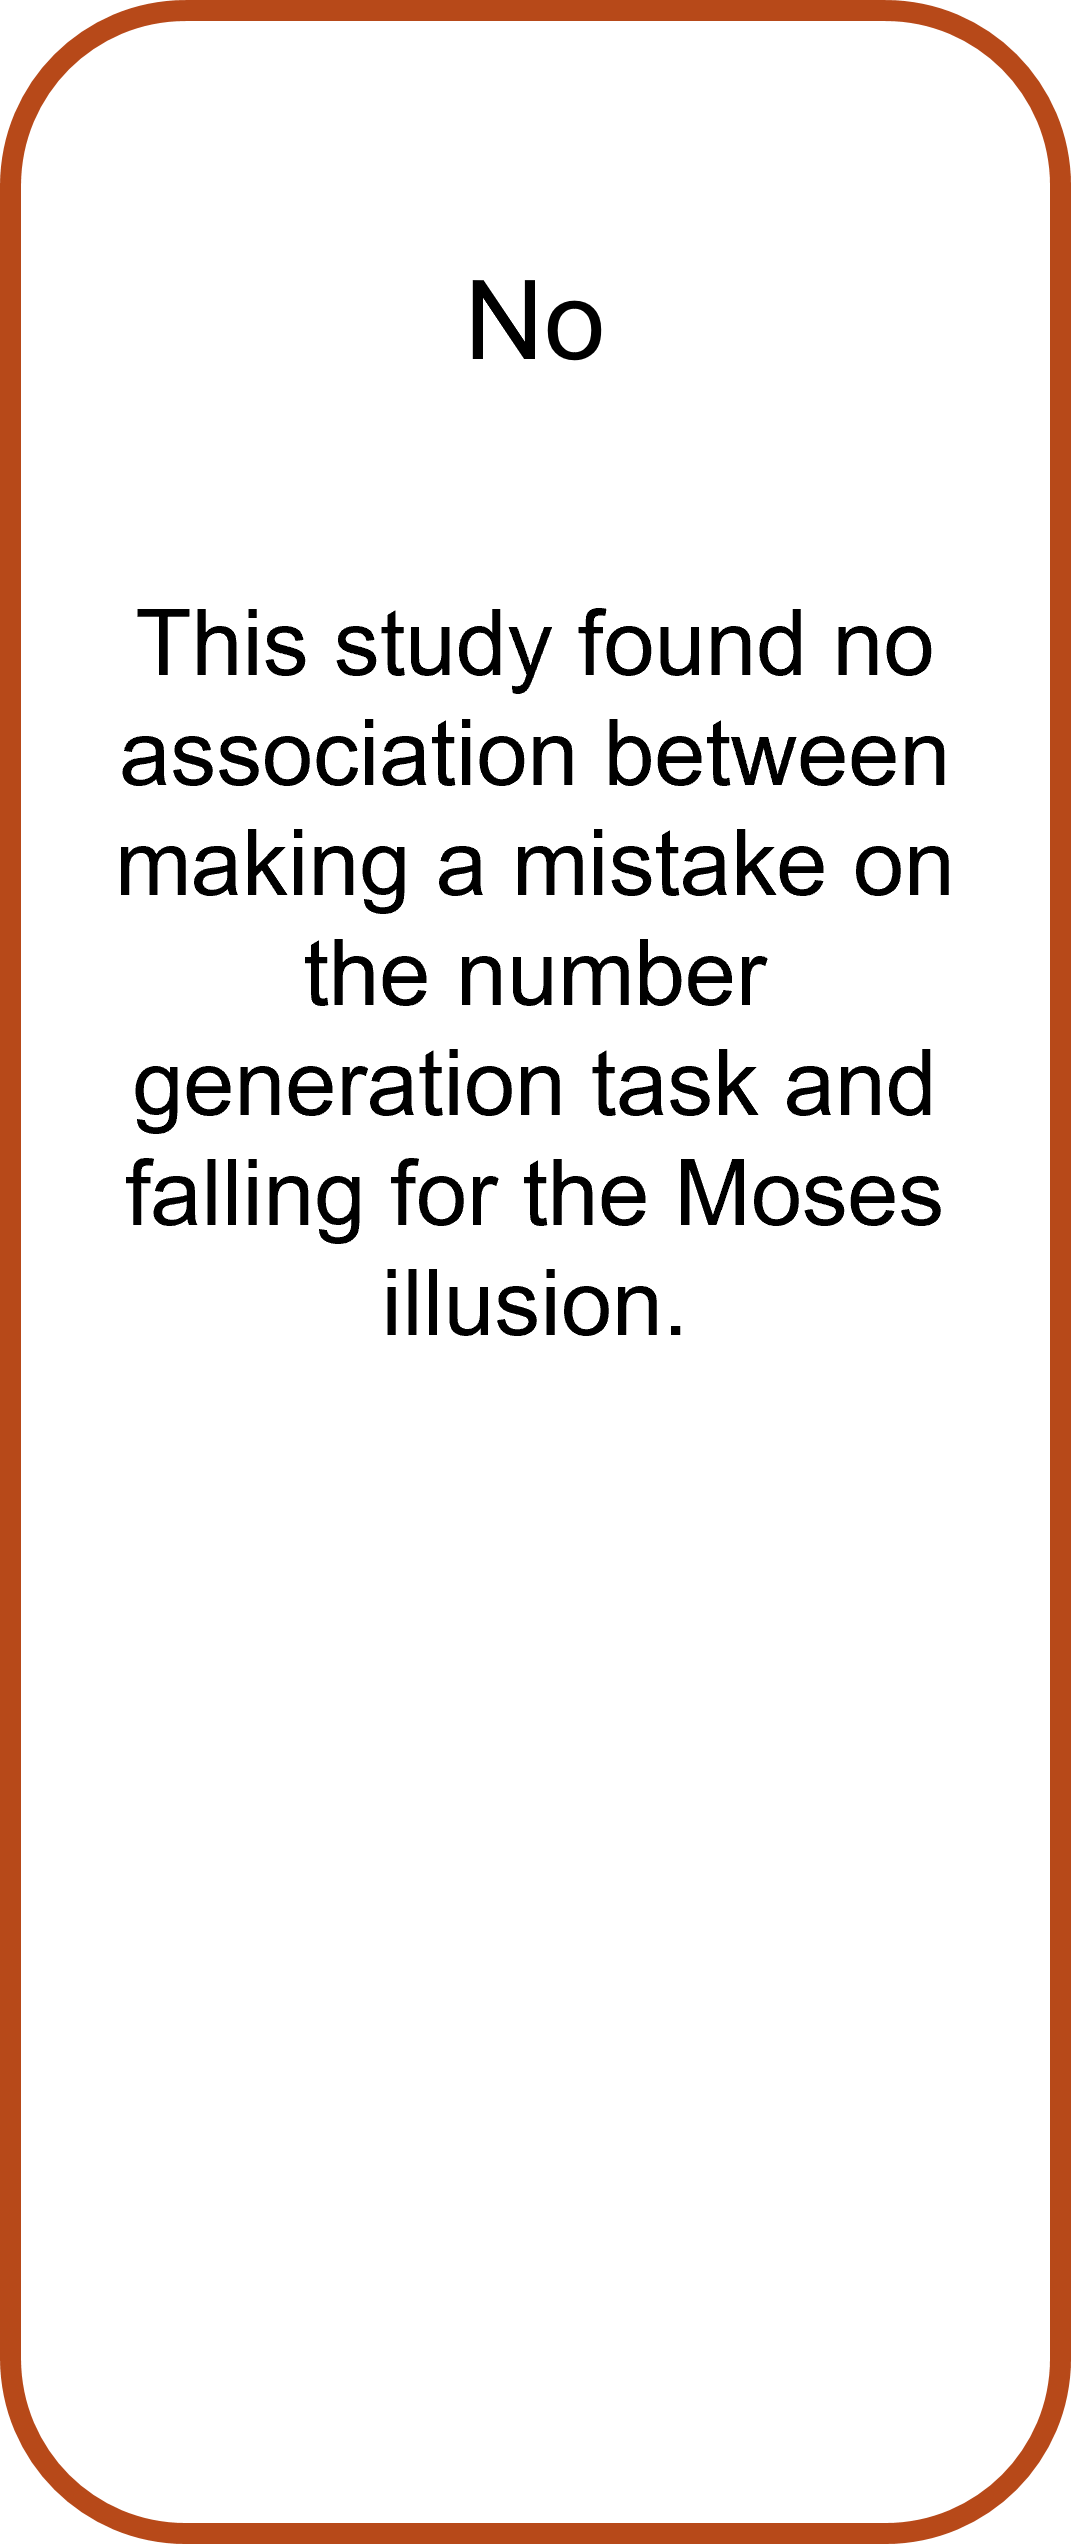 5. Are responses in number generation tasks associated with responses to the Moses Illusion? No   This study found no association between making a mistake on the number generation task and falling for the Moses illusion.